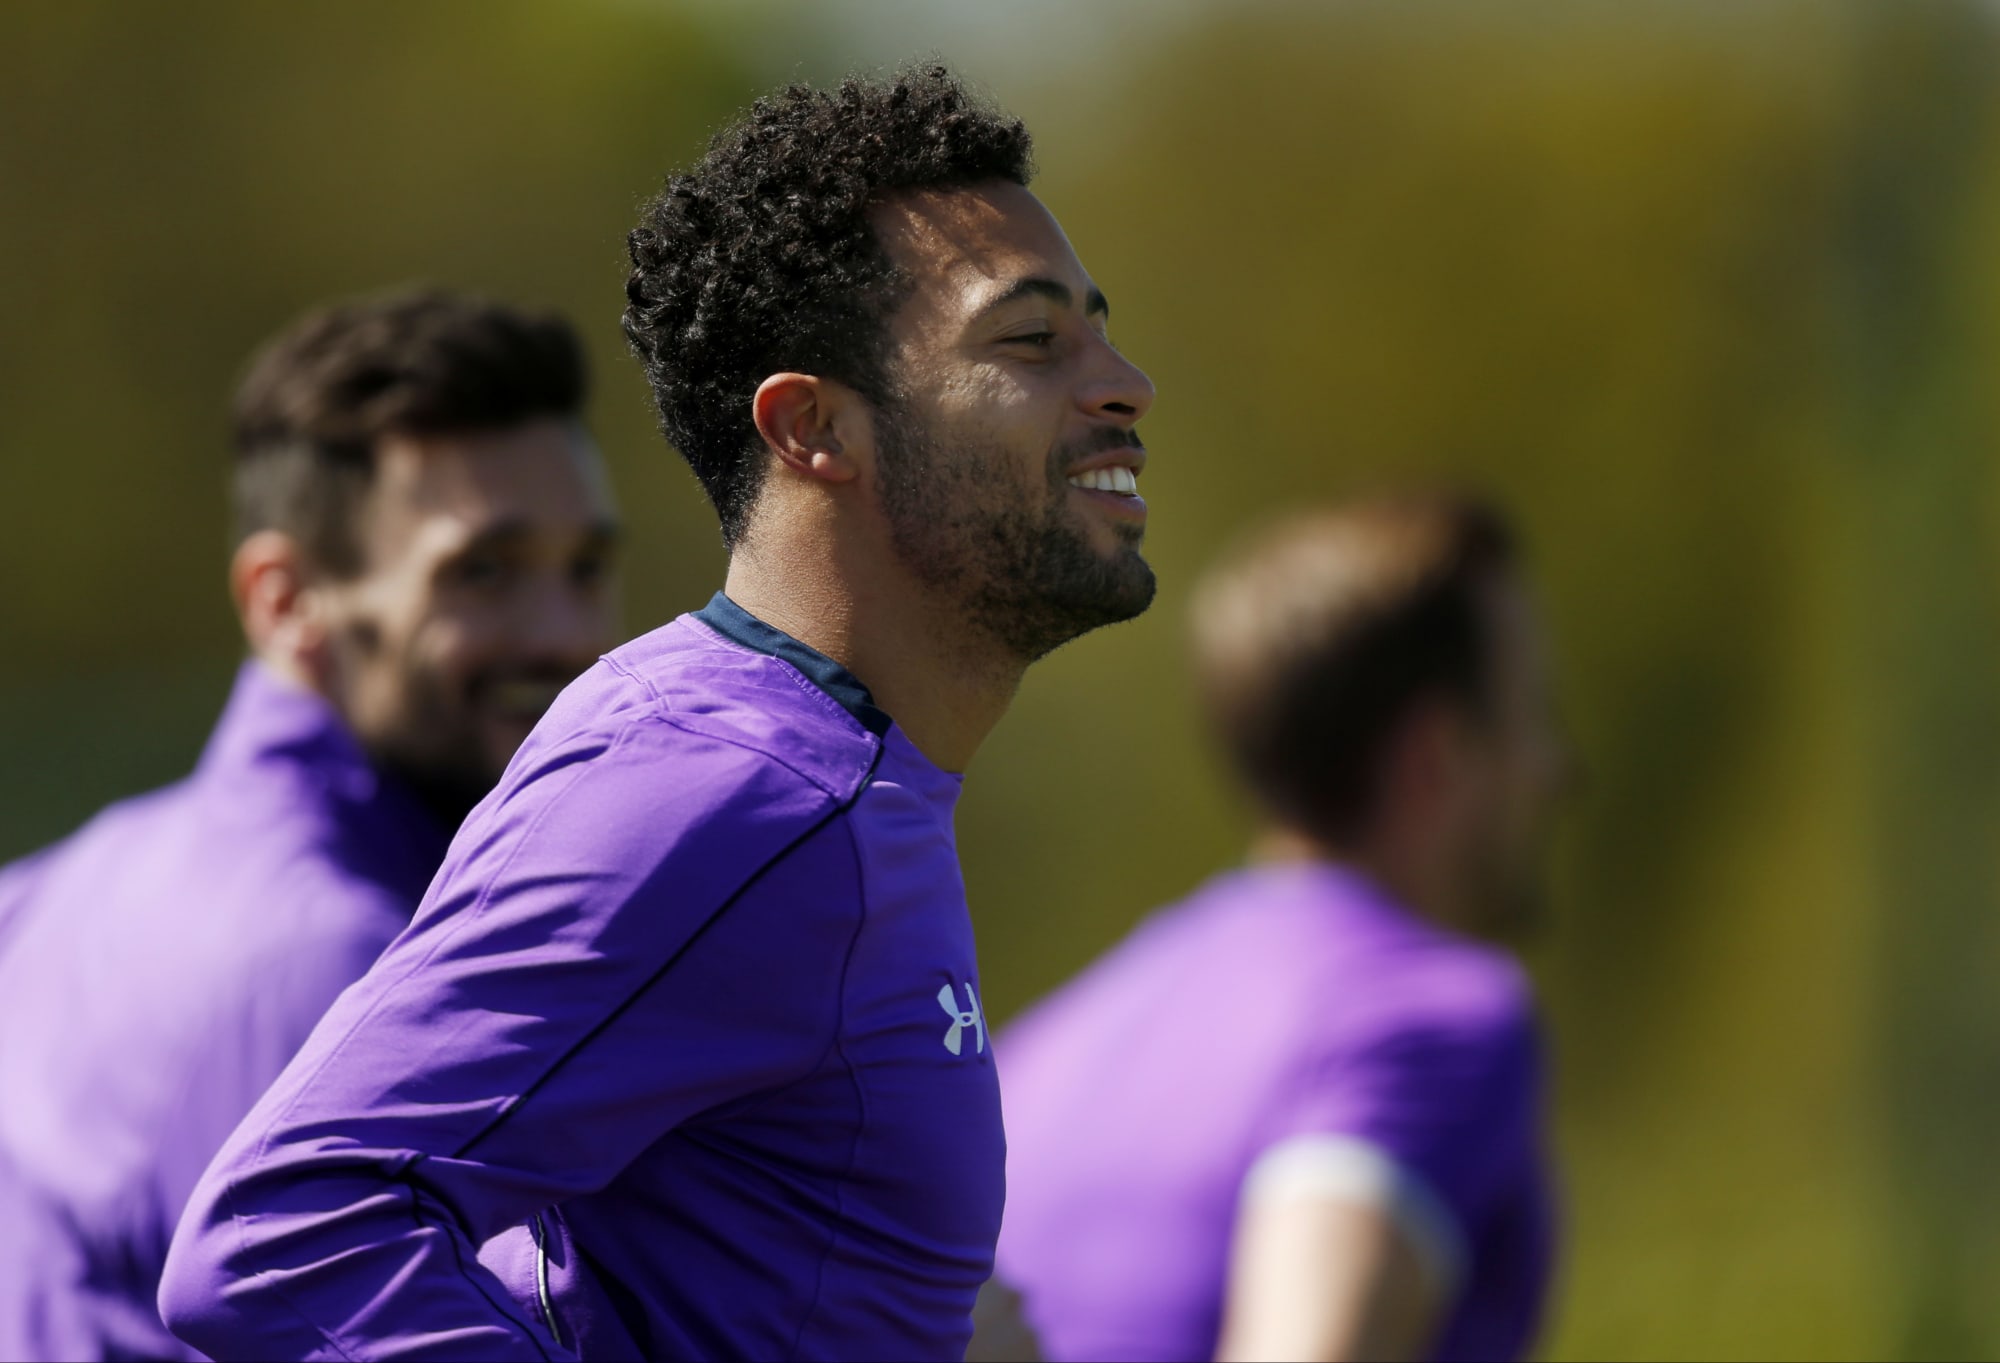 Tottenham tactics: Why Mousa Dembele means so much to Spurs